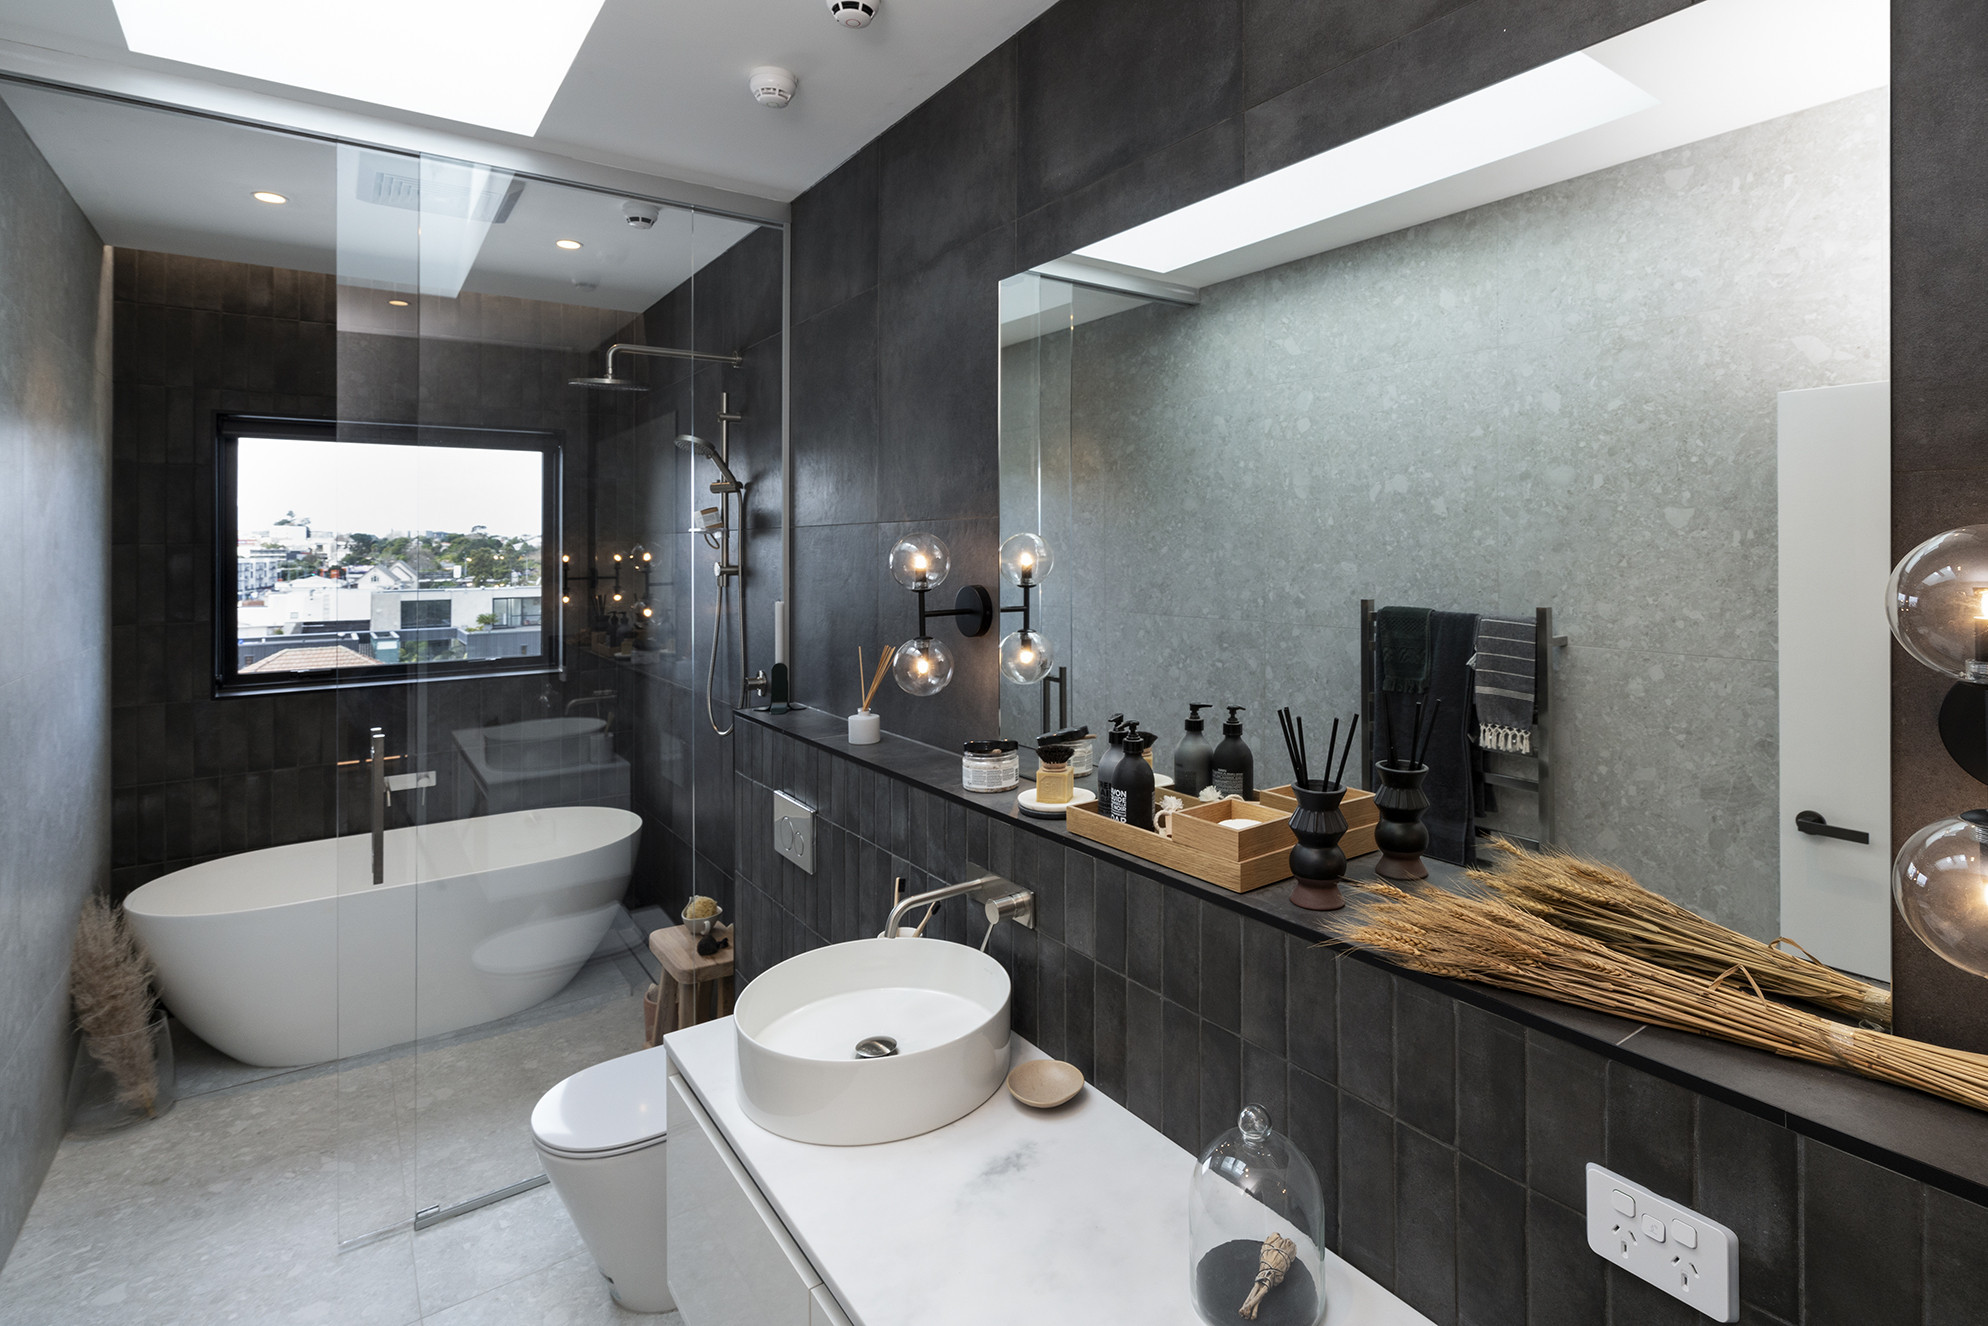 Modern bathroom with a transparent glass shower screen, bath, basin, and black tiled wall